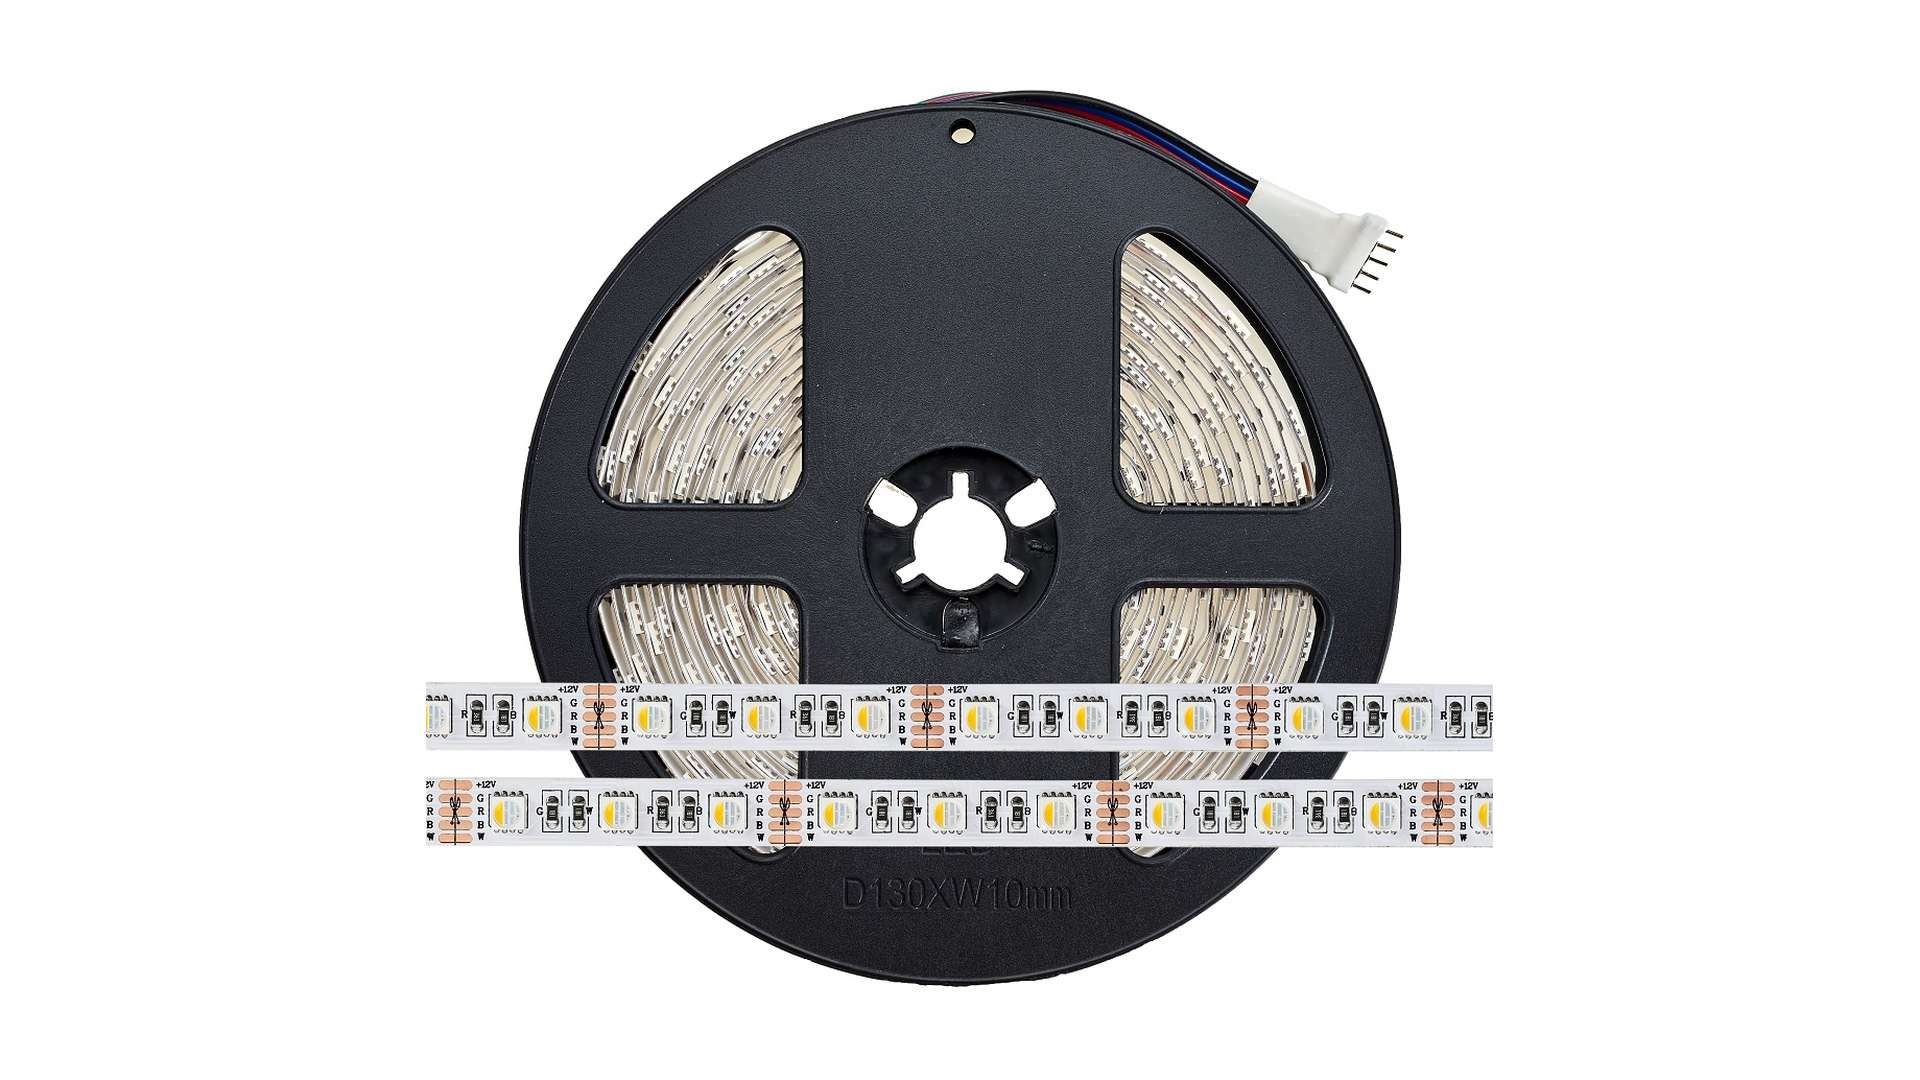 Taśma 300 LED 60 LED/m 5050 SMD, RGBCW IN1 IP65